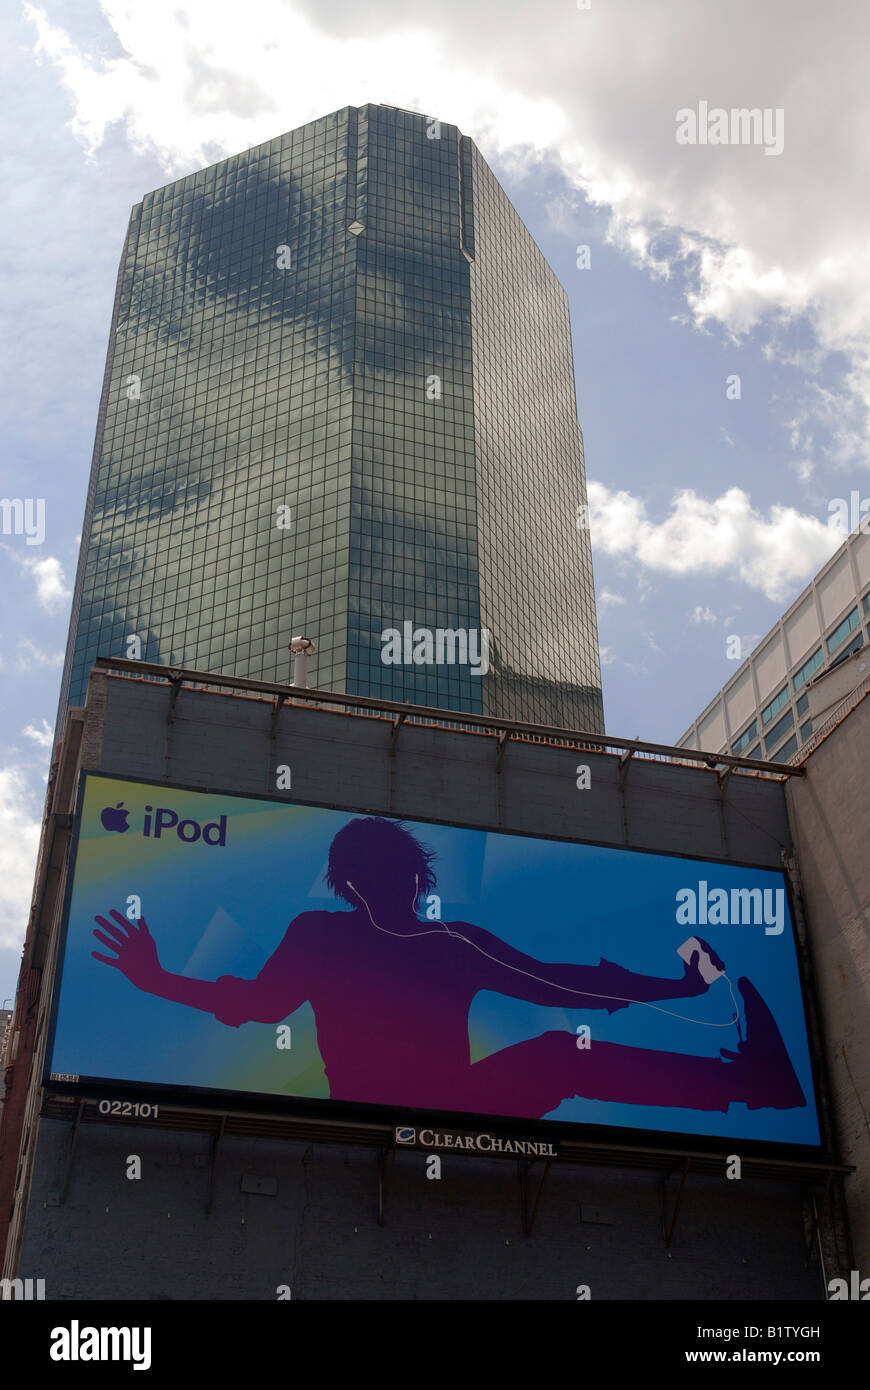 Advertising for the Apple Inc iPod on a billboard in Lower Manhattan in New York Stock Photo